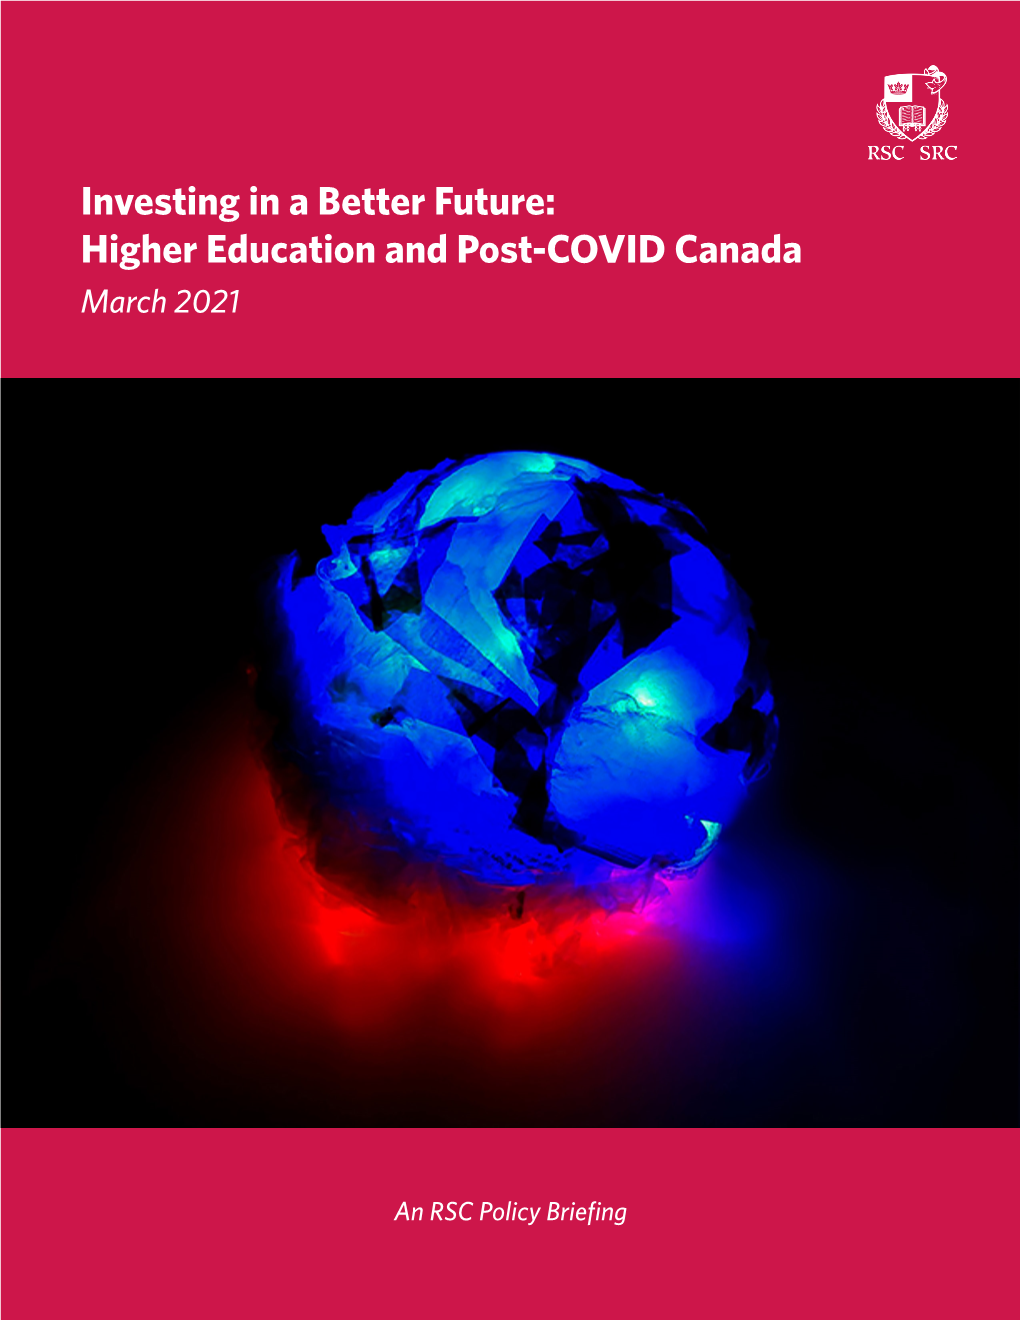 Higher Education and Post-COVID Canada March 2021